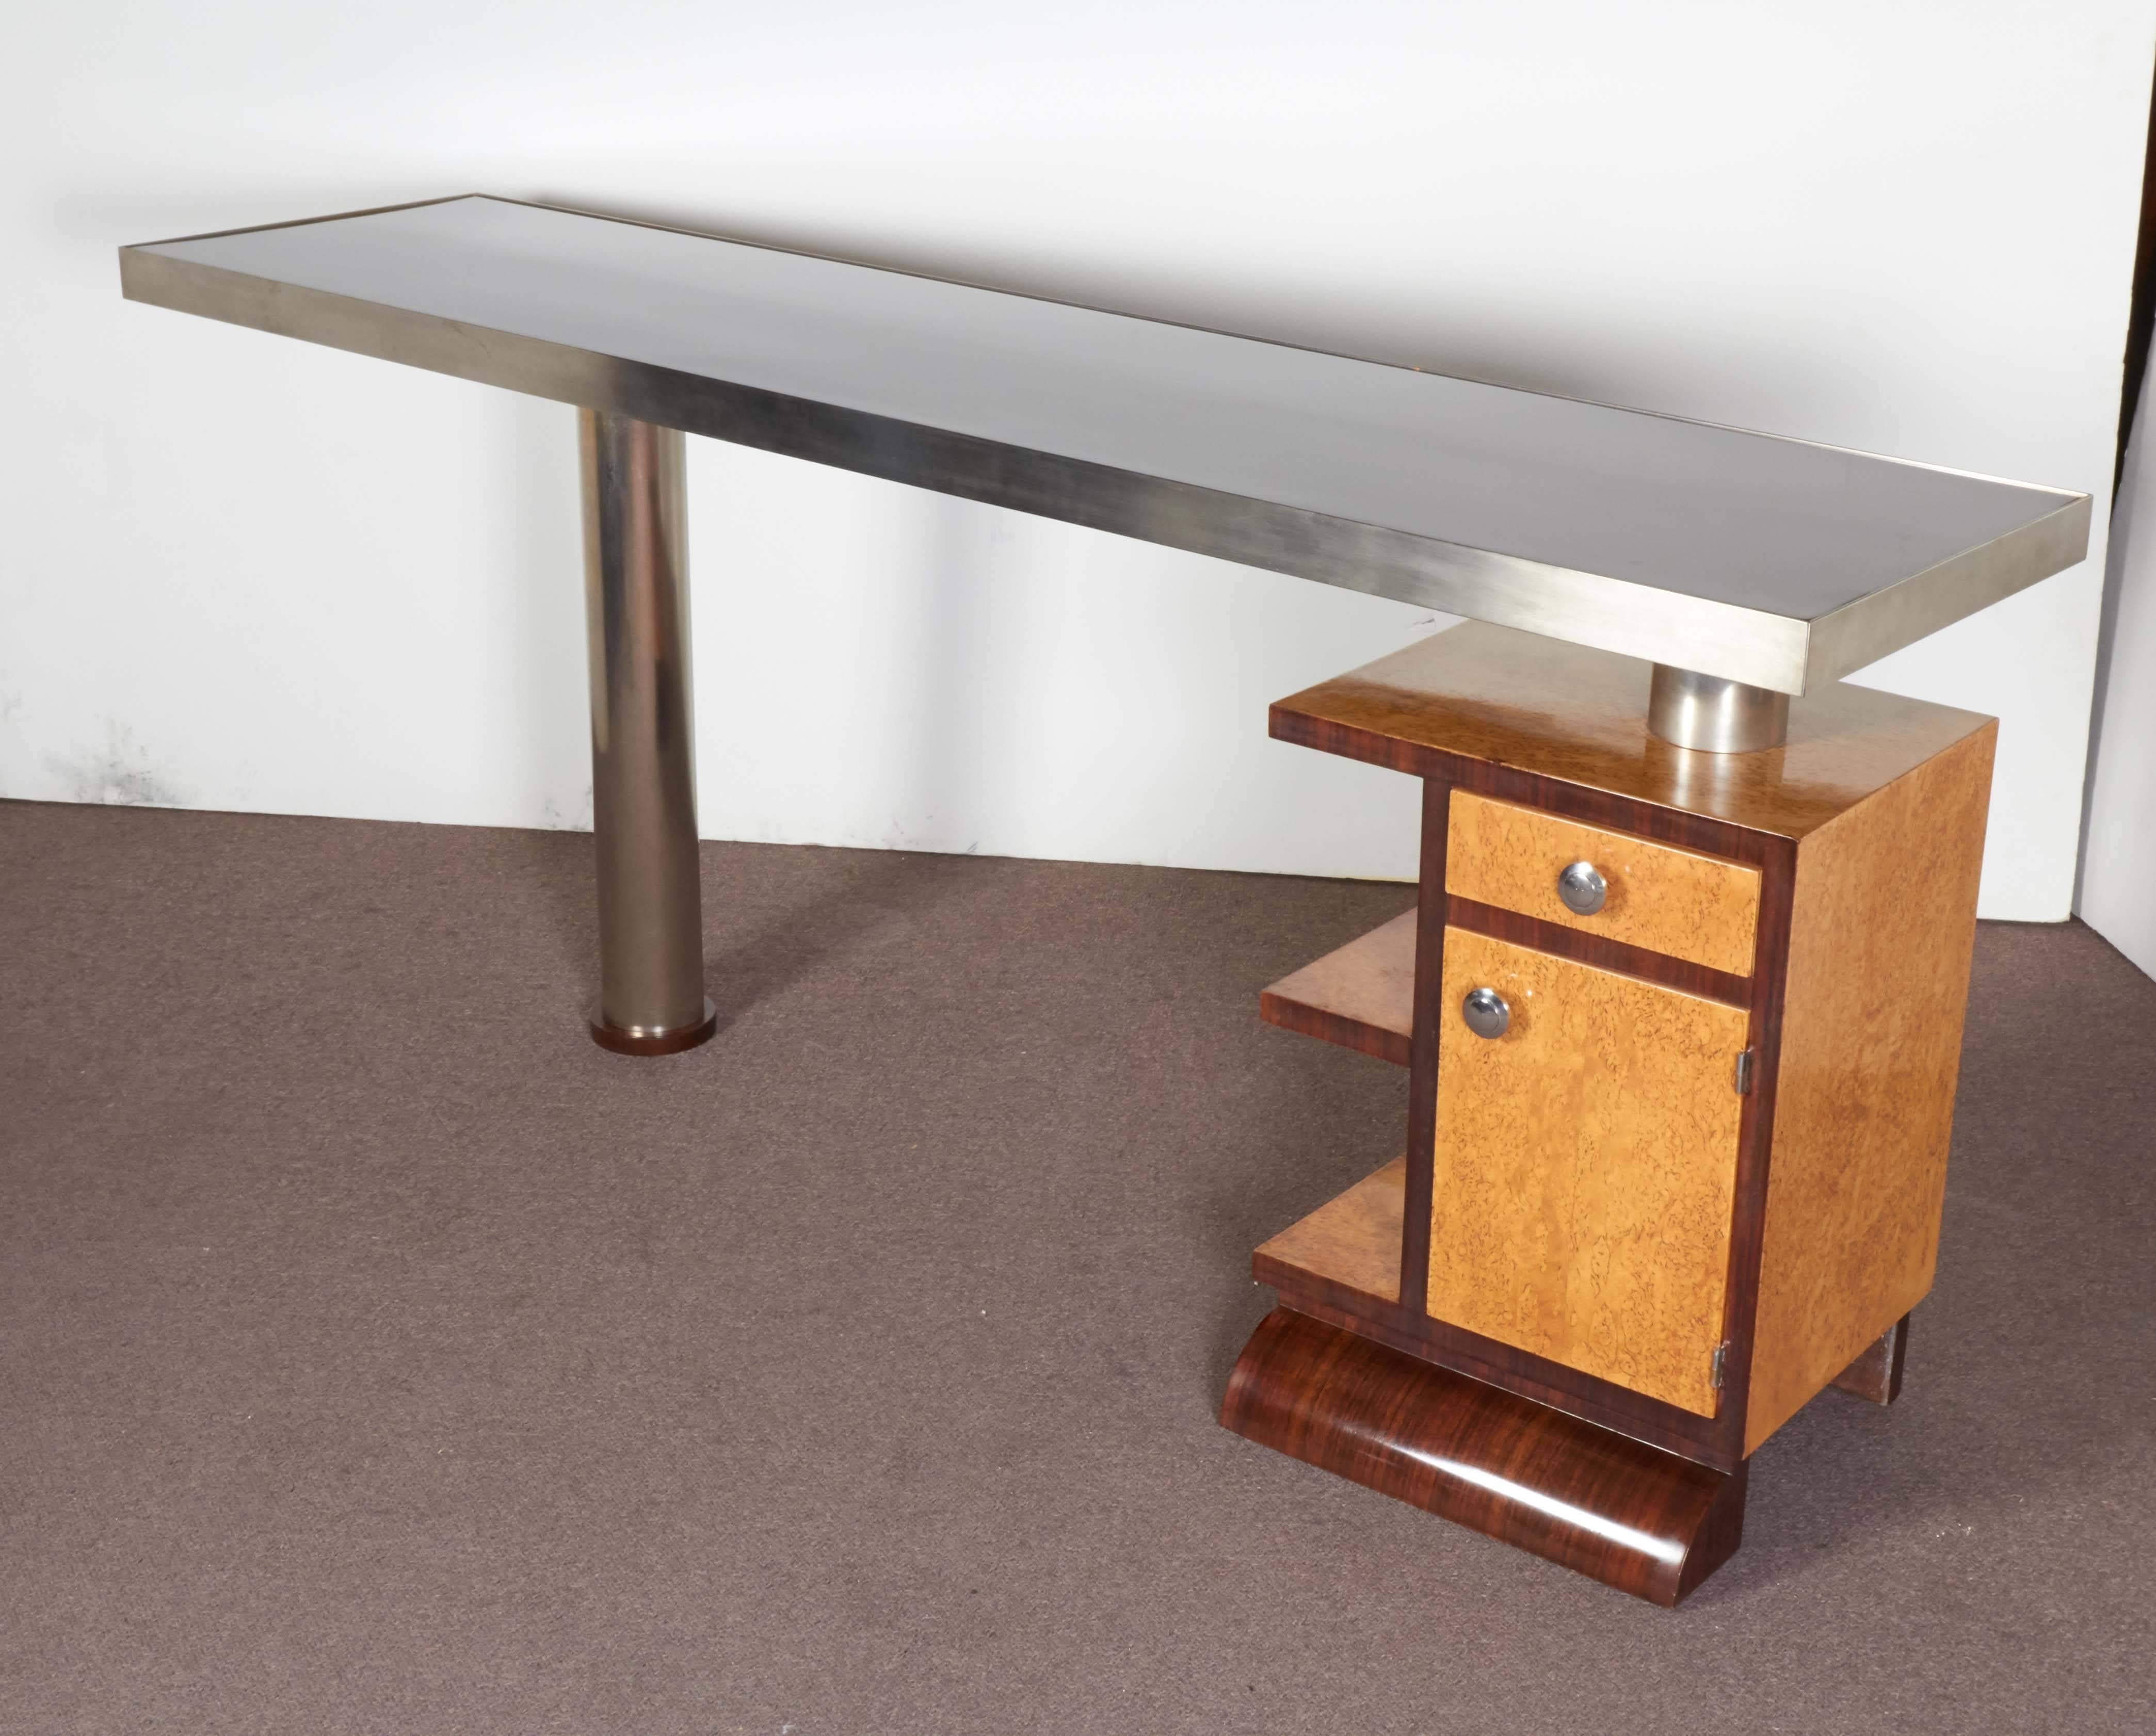 French Art Deco slim and streamline unusual desk in two tone wood with side storage compartment, polished nickeled bronze banded surround and matching pole support.
The side structure can be turned around 180 degrees and therefore placed either on